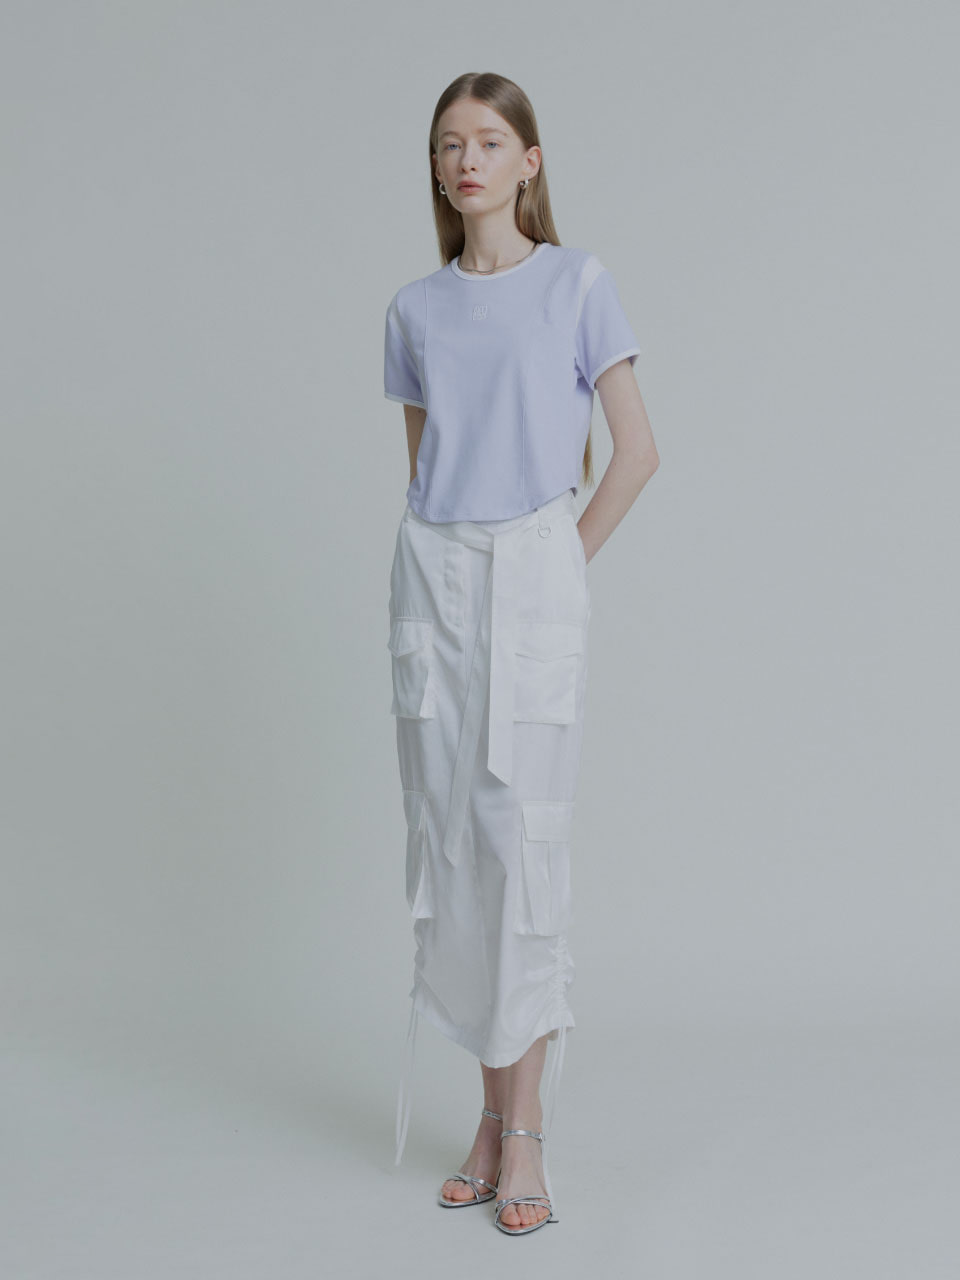 FRIDA Embroidered Color Point Curved Hem Crop Top_Lilac